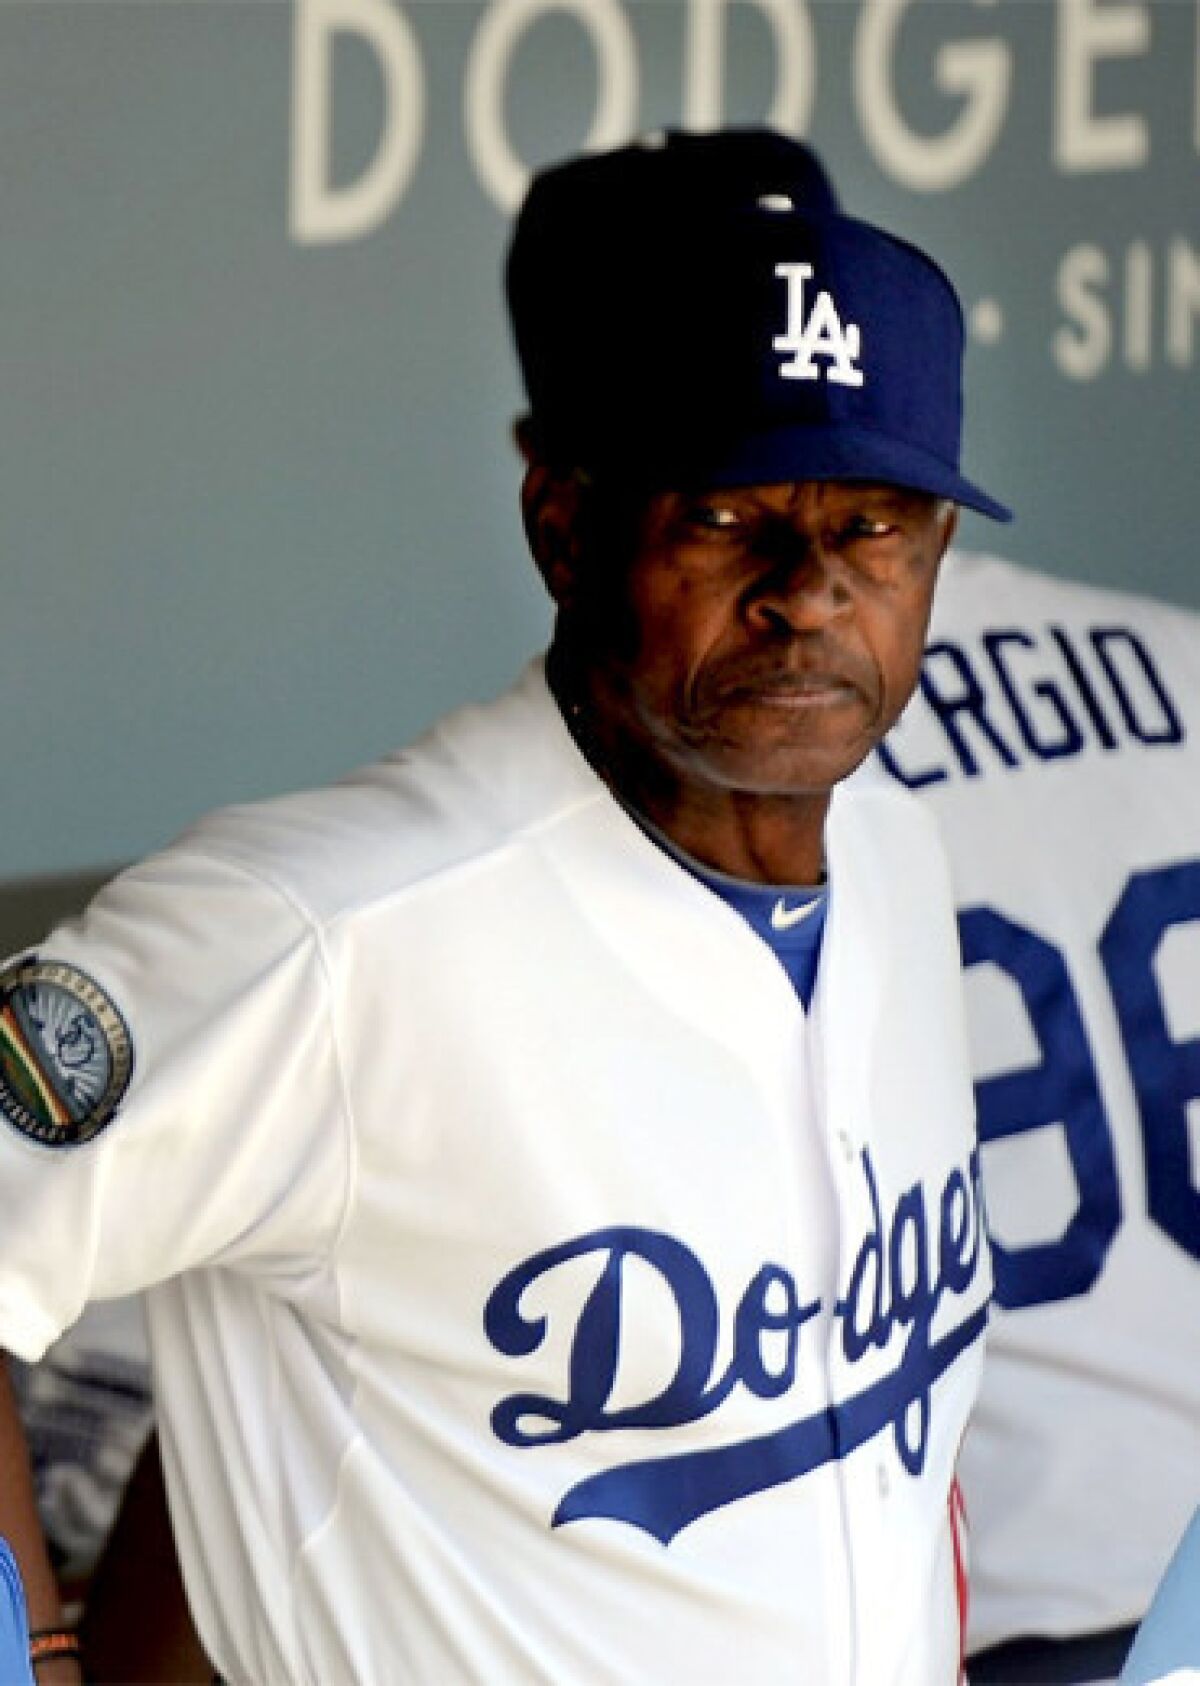 Manny Mota started his coaching career with the Dodgers in 1980.